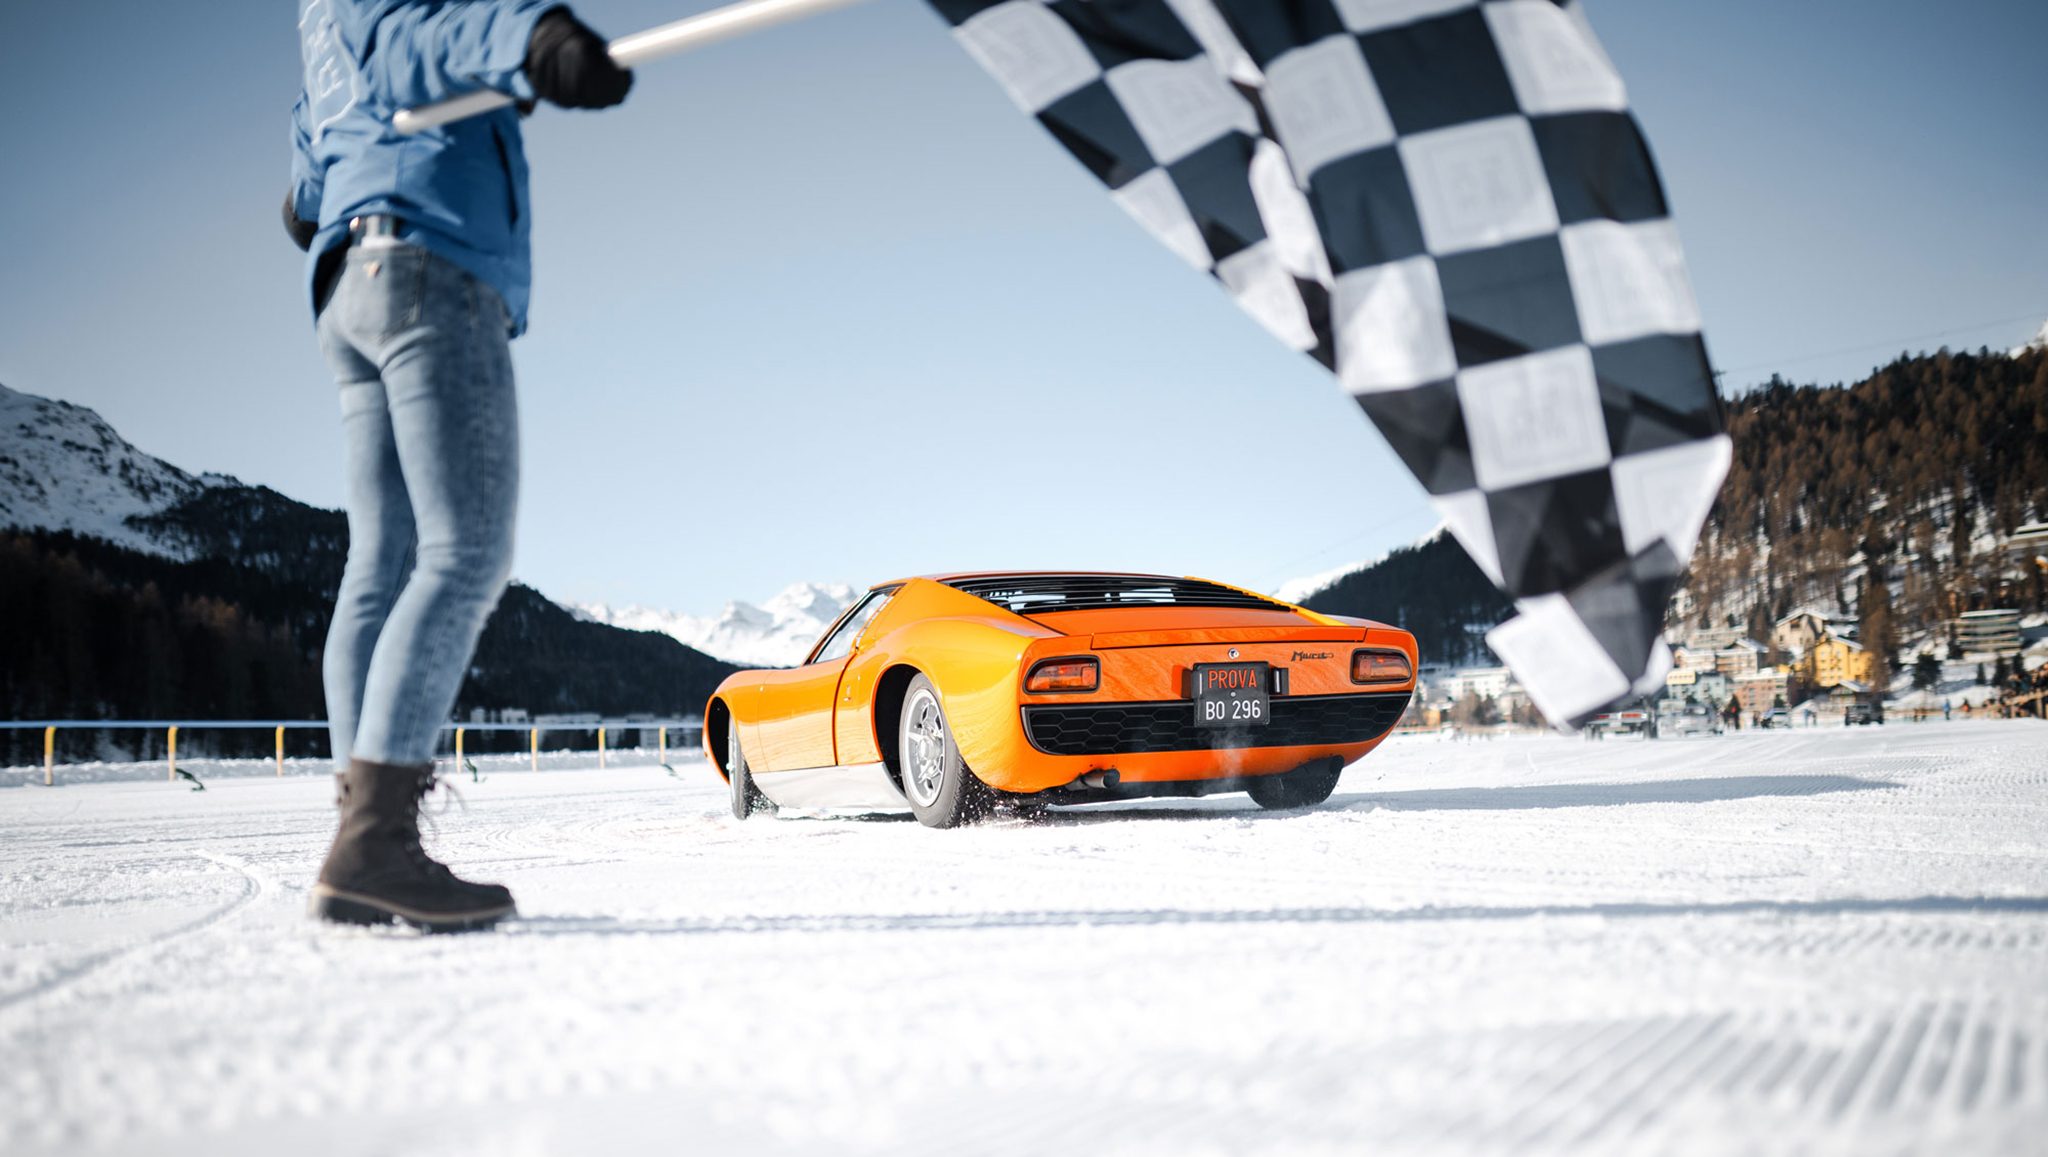 ICE St Moritz is the coolest (and coldest) concours in the world